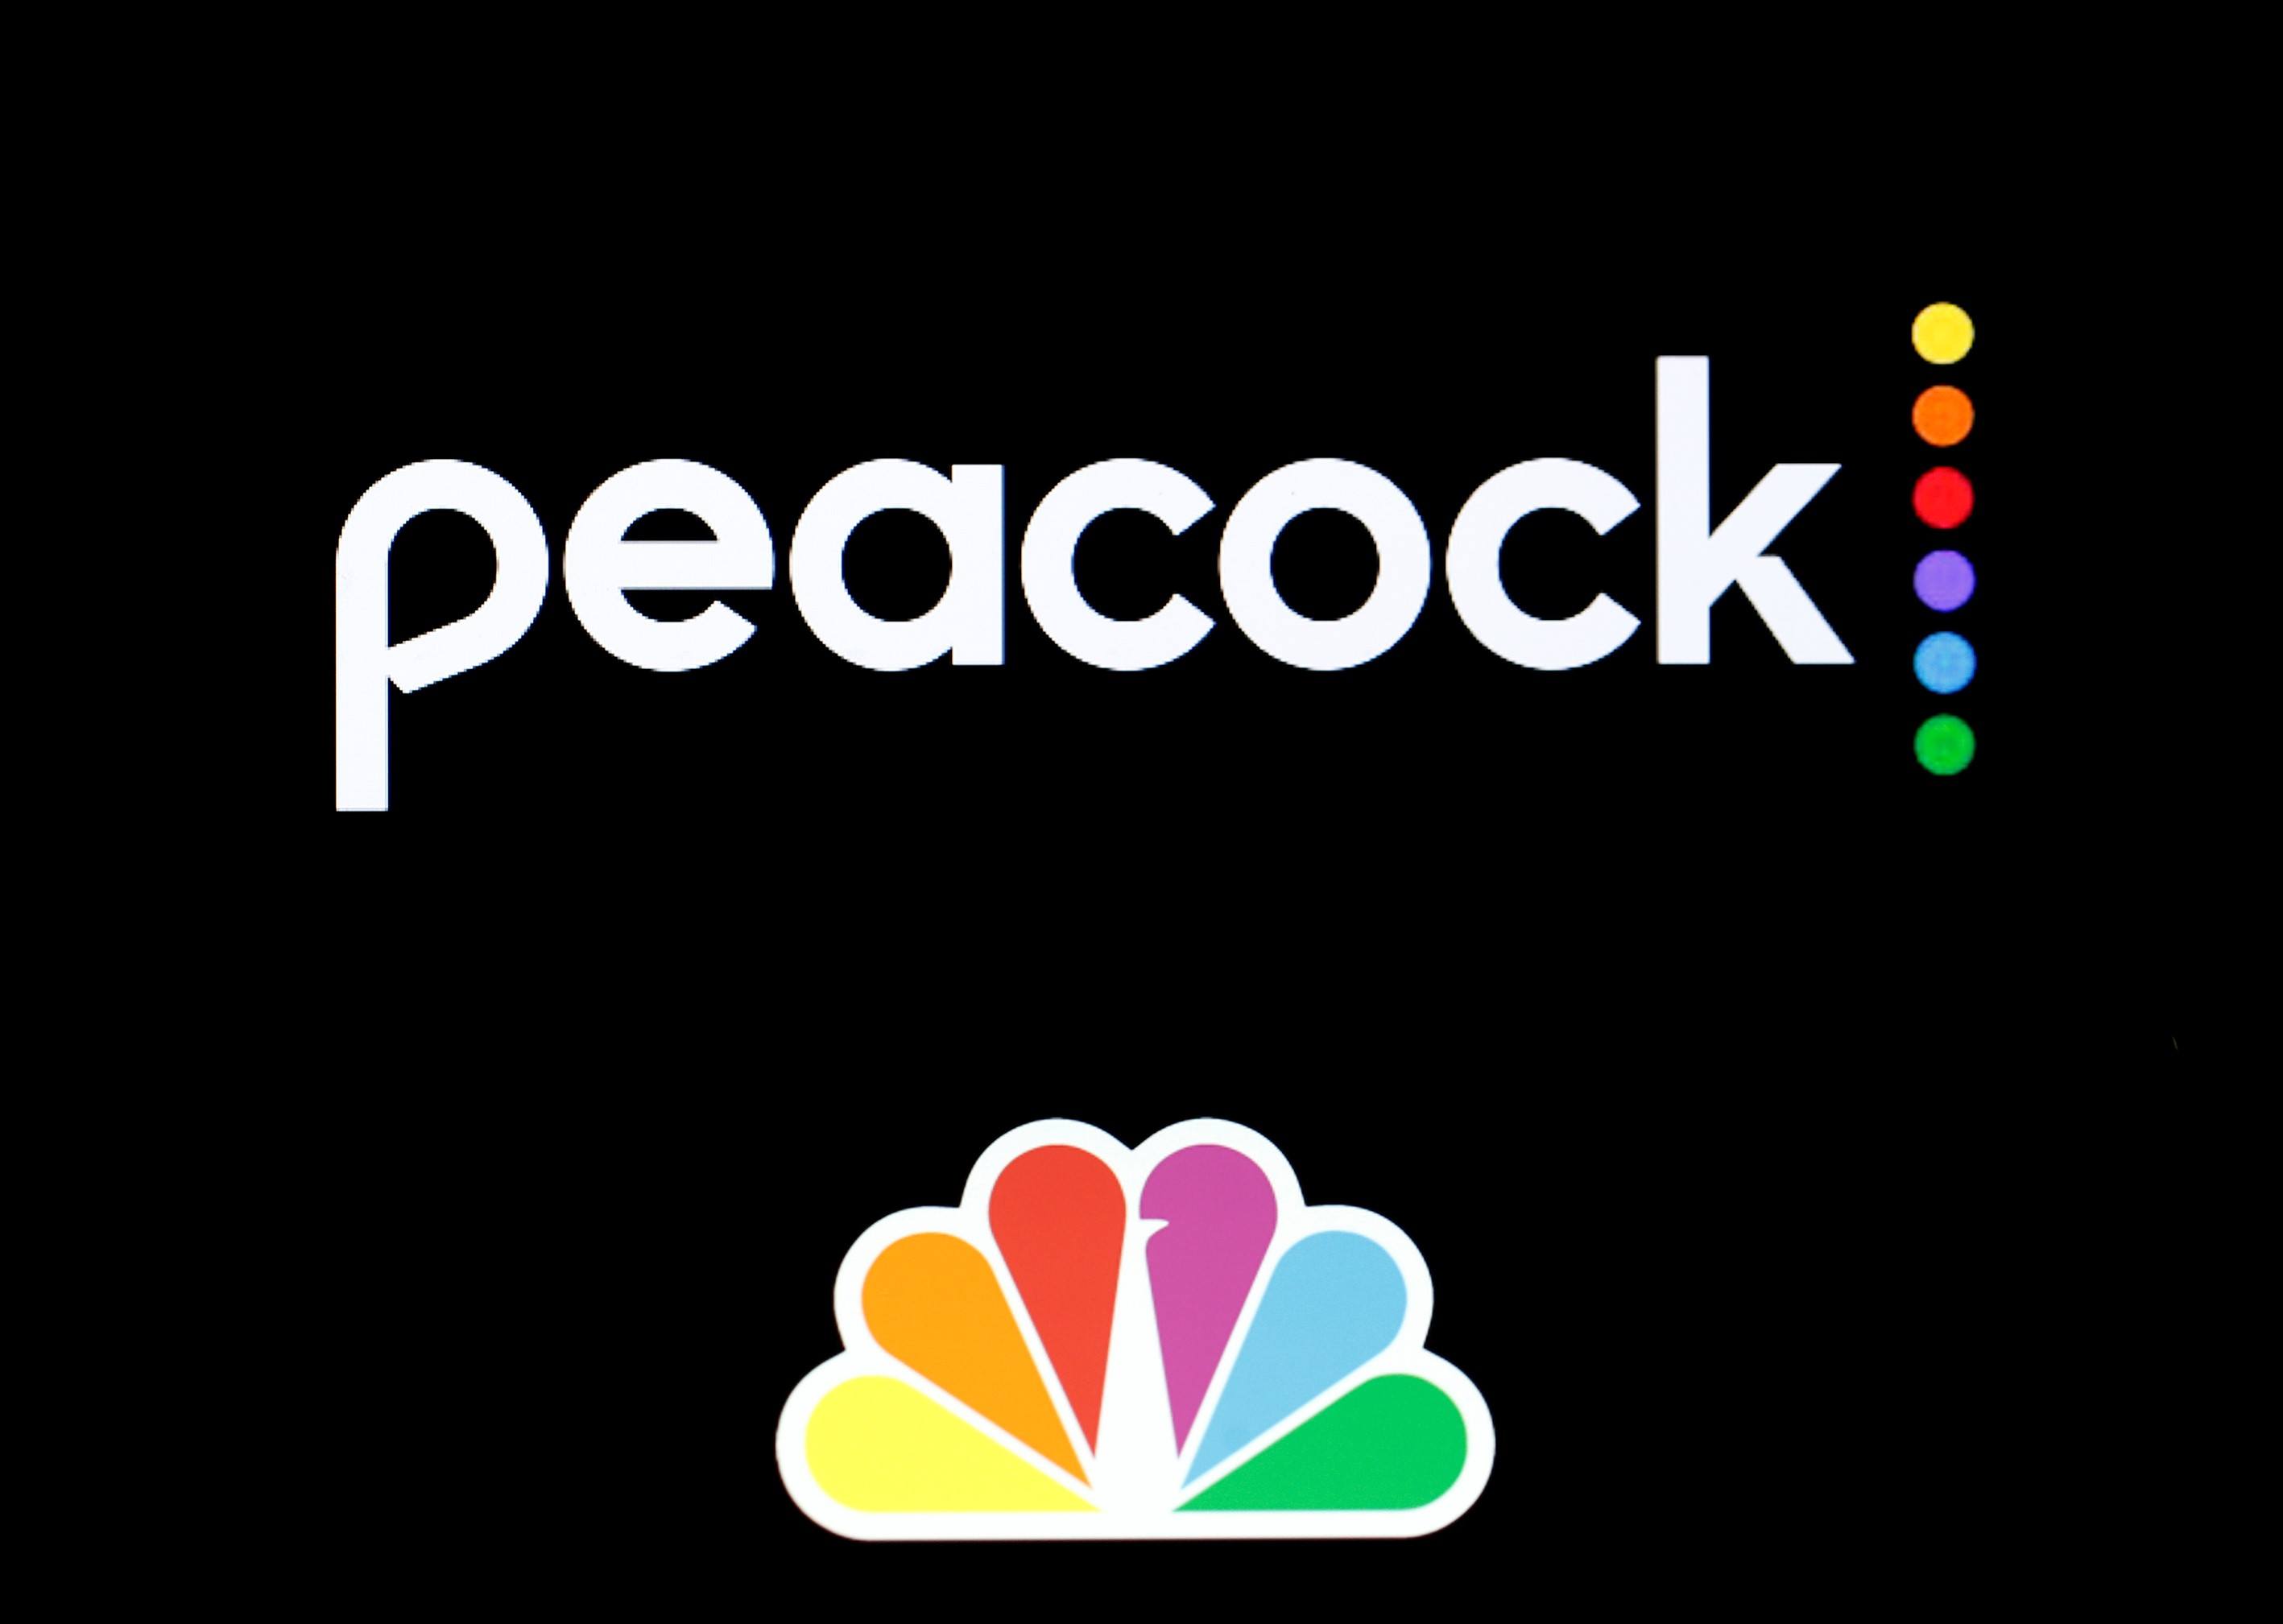 Comcast’s Peacock Will Lose $2.8 Billion This Year as it Hits 30 Million Subscribers